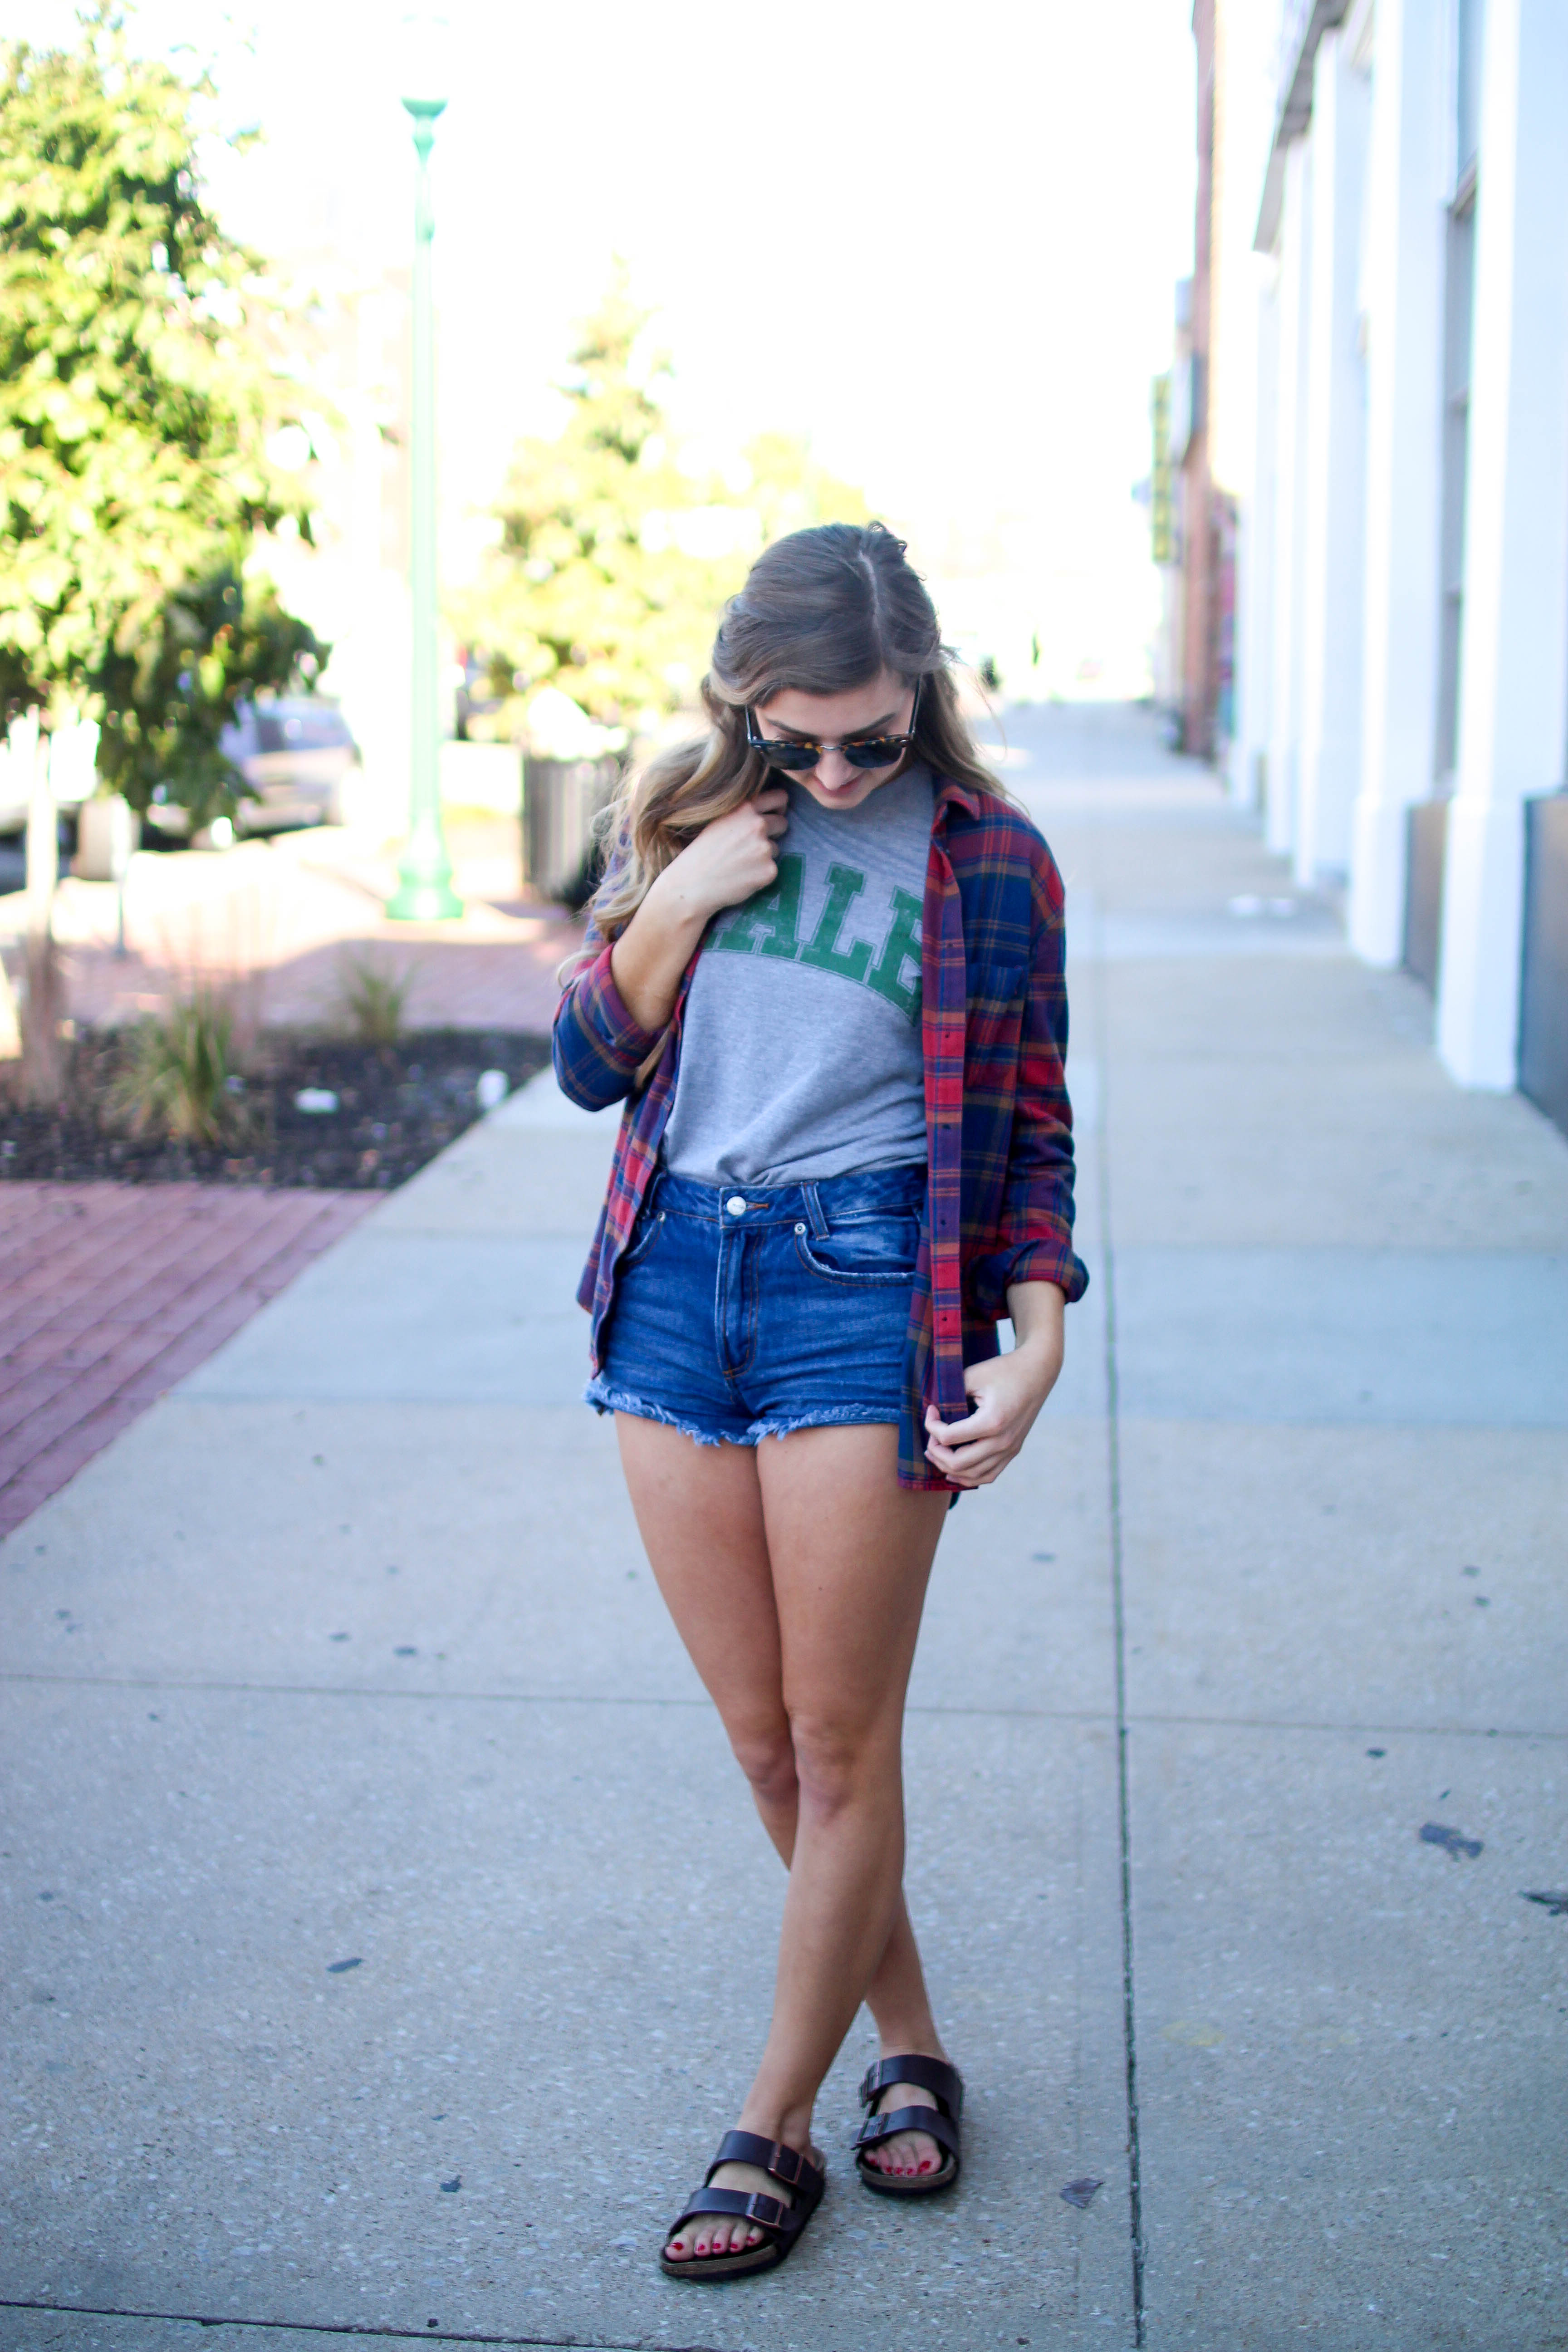 How to style flannel shirts, kale shirt on the blog daily dose of charm dailydoseofcharm.com by lauren lindmark